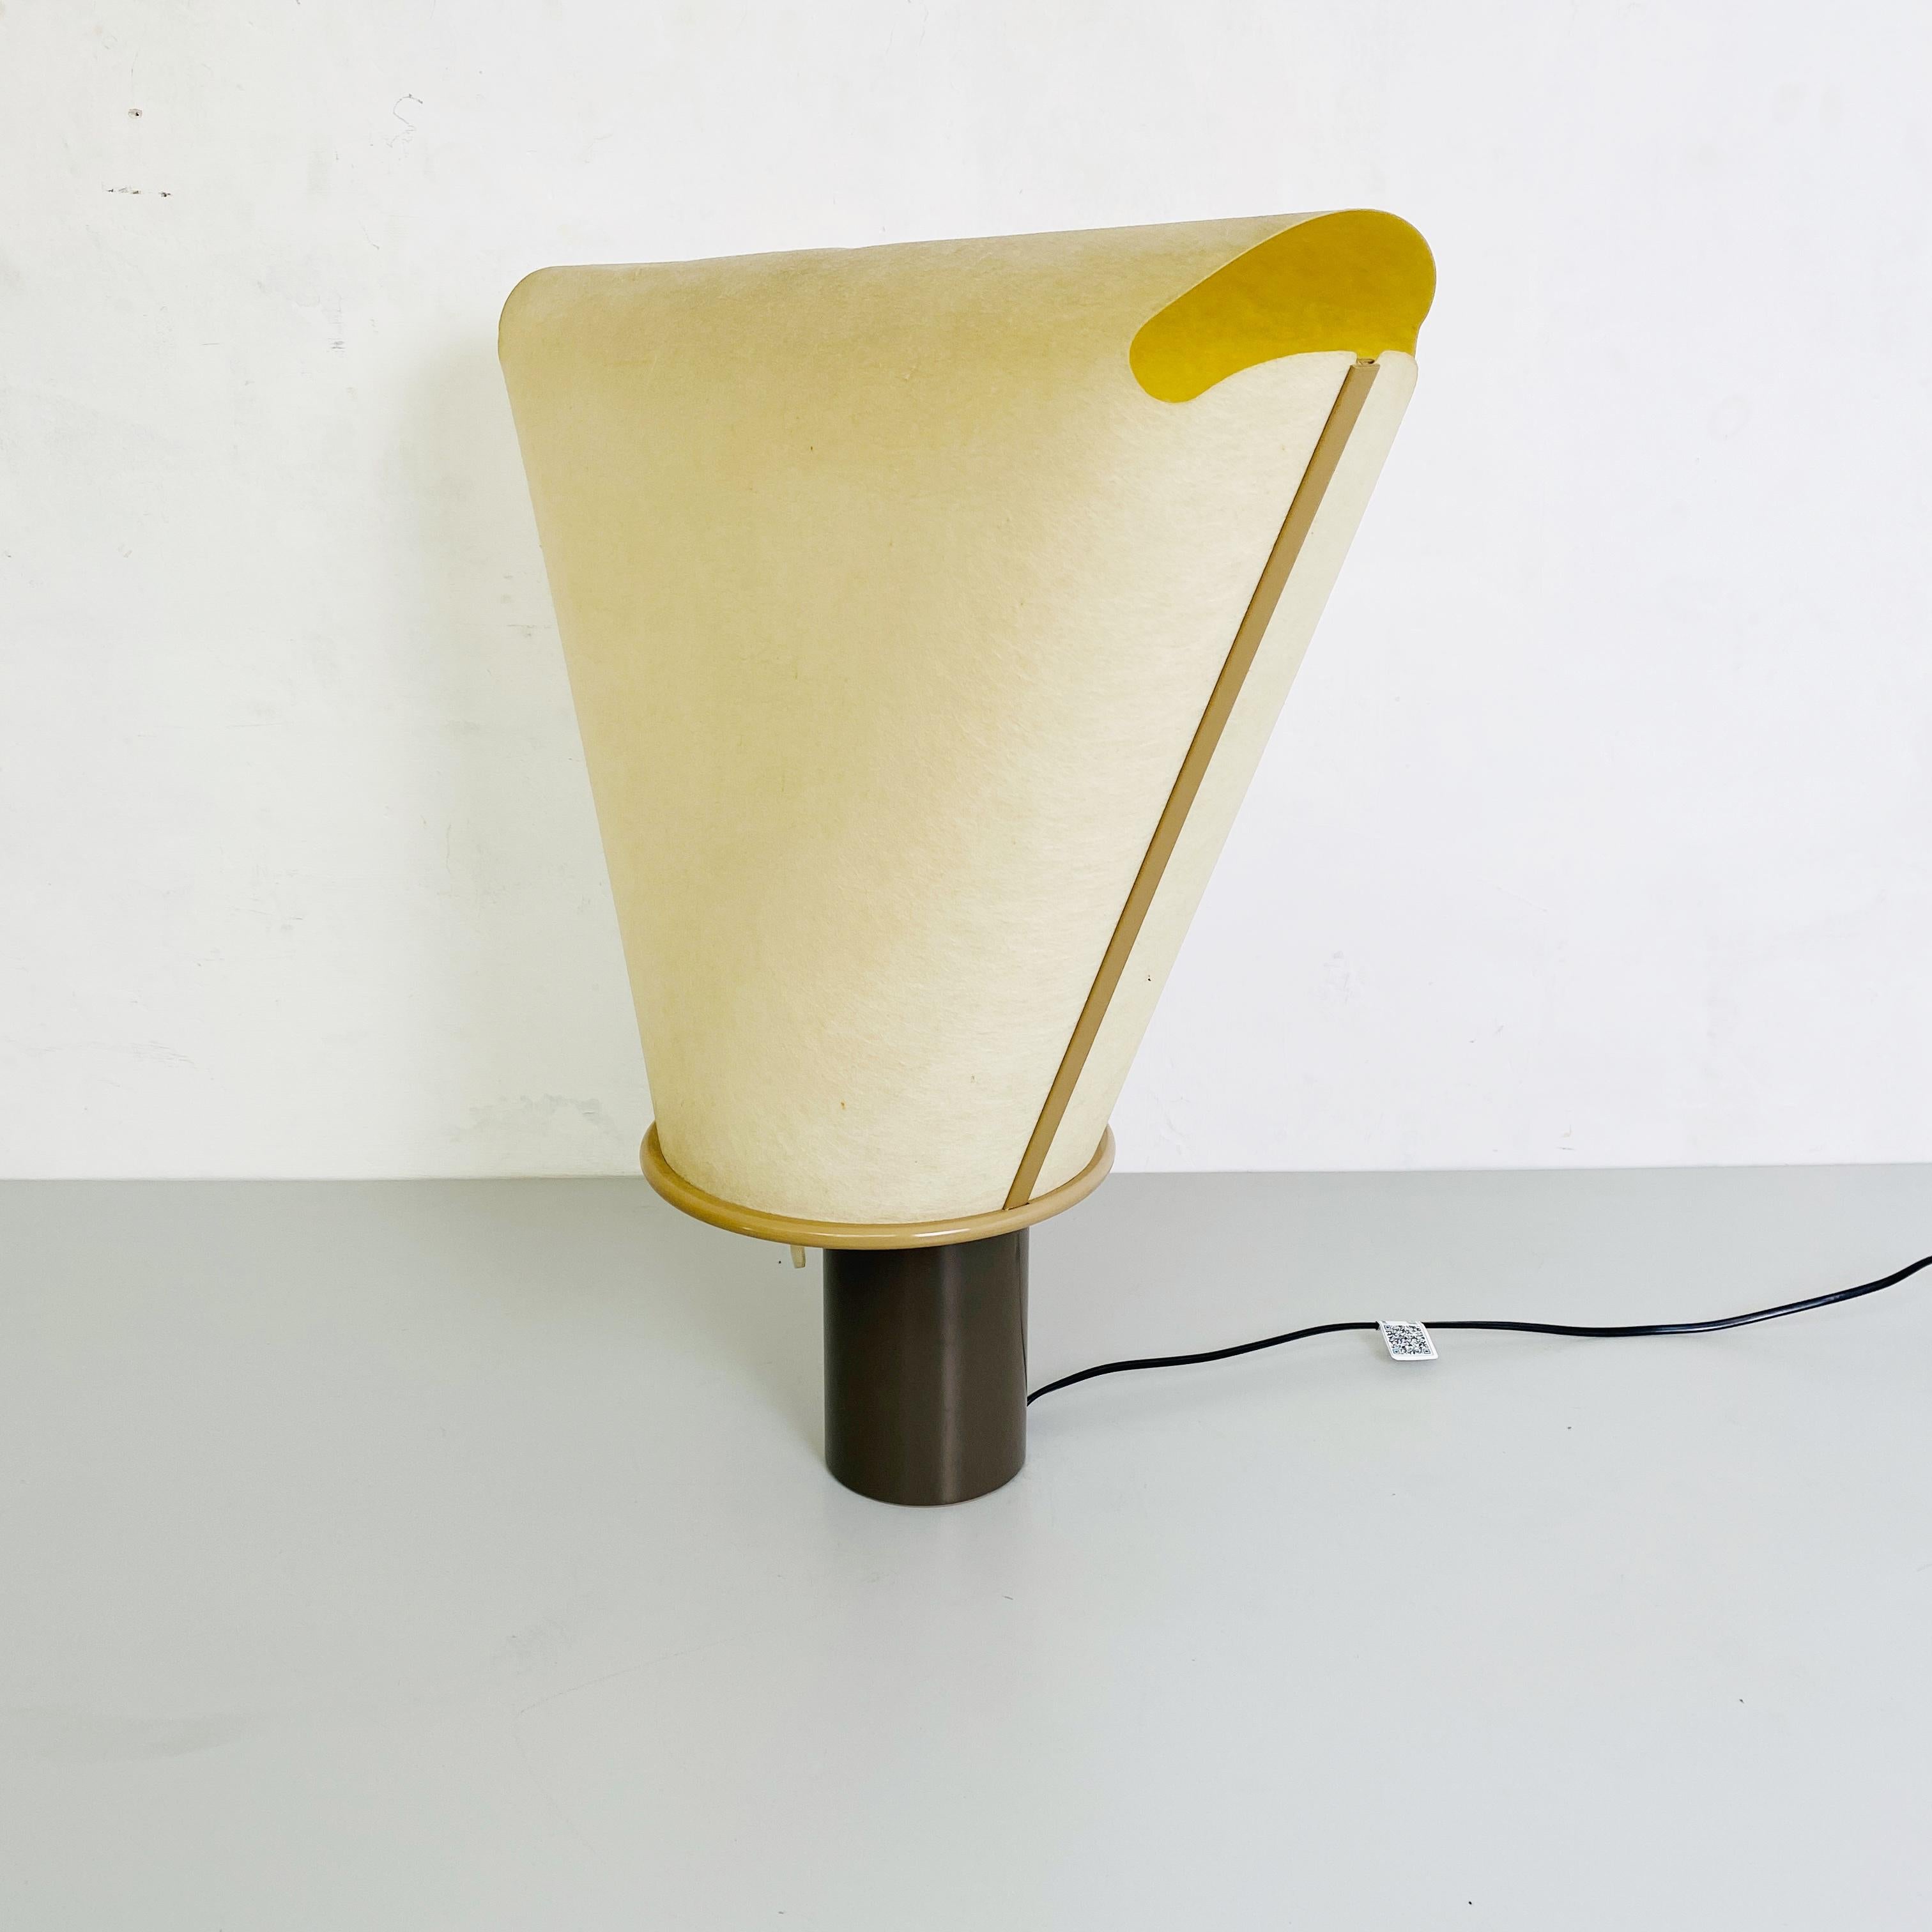 Late 20th Century Italian Dolly A 200 Table Lamp by King & Miranda Design for Arteluce, 1970s